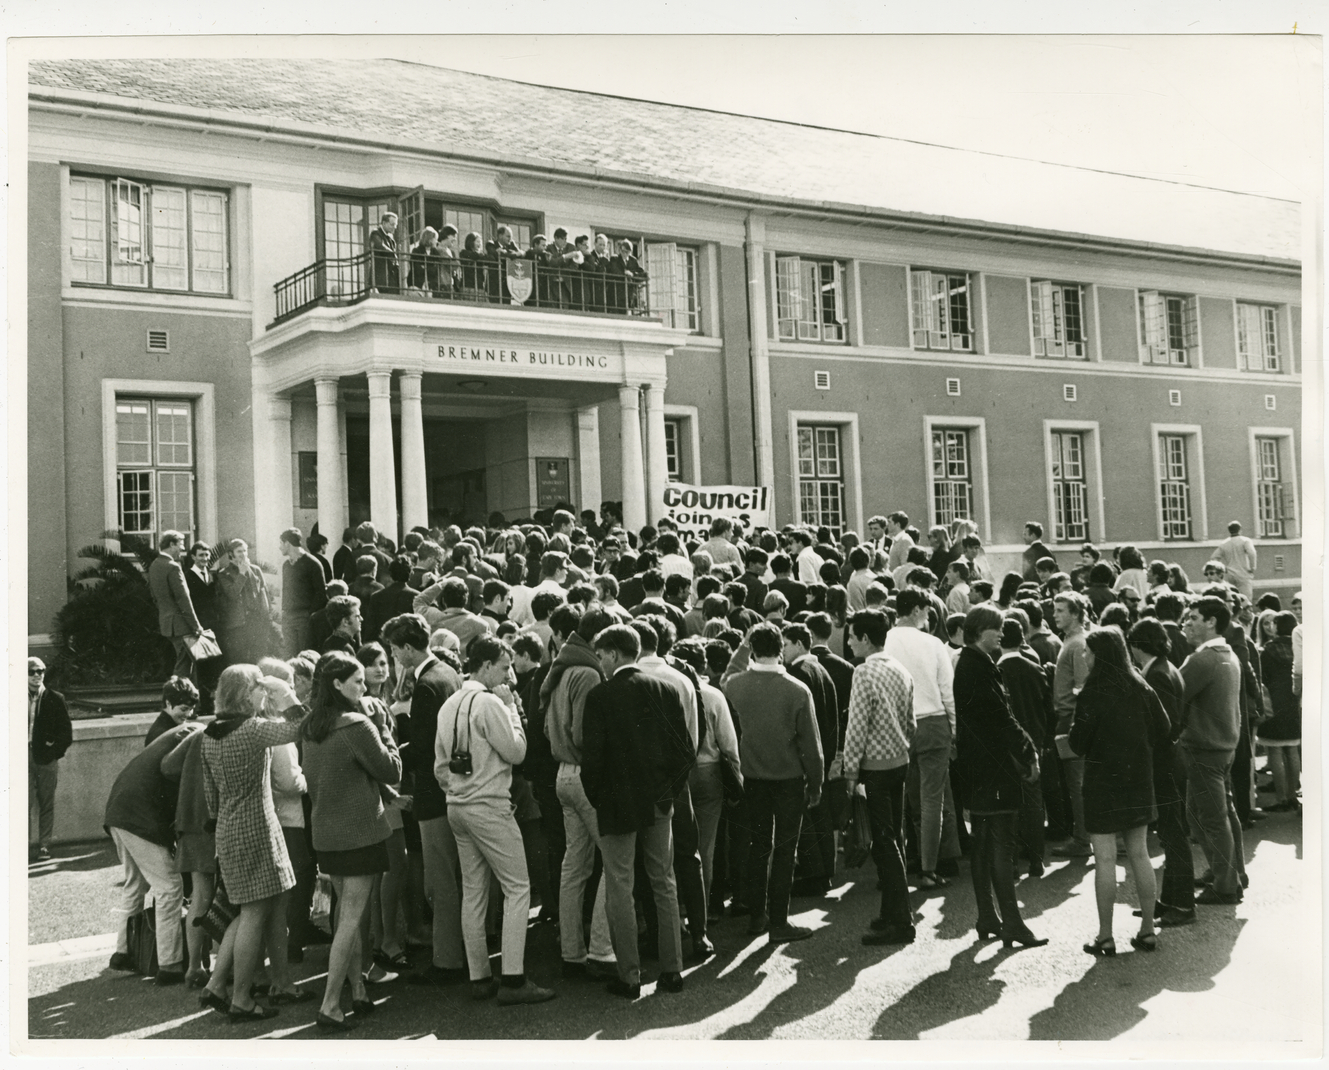 New history of UCT under Apartheid shines a light on archival sources